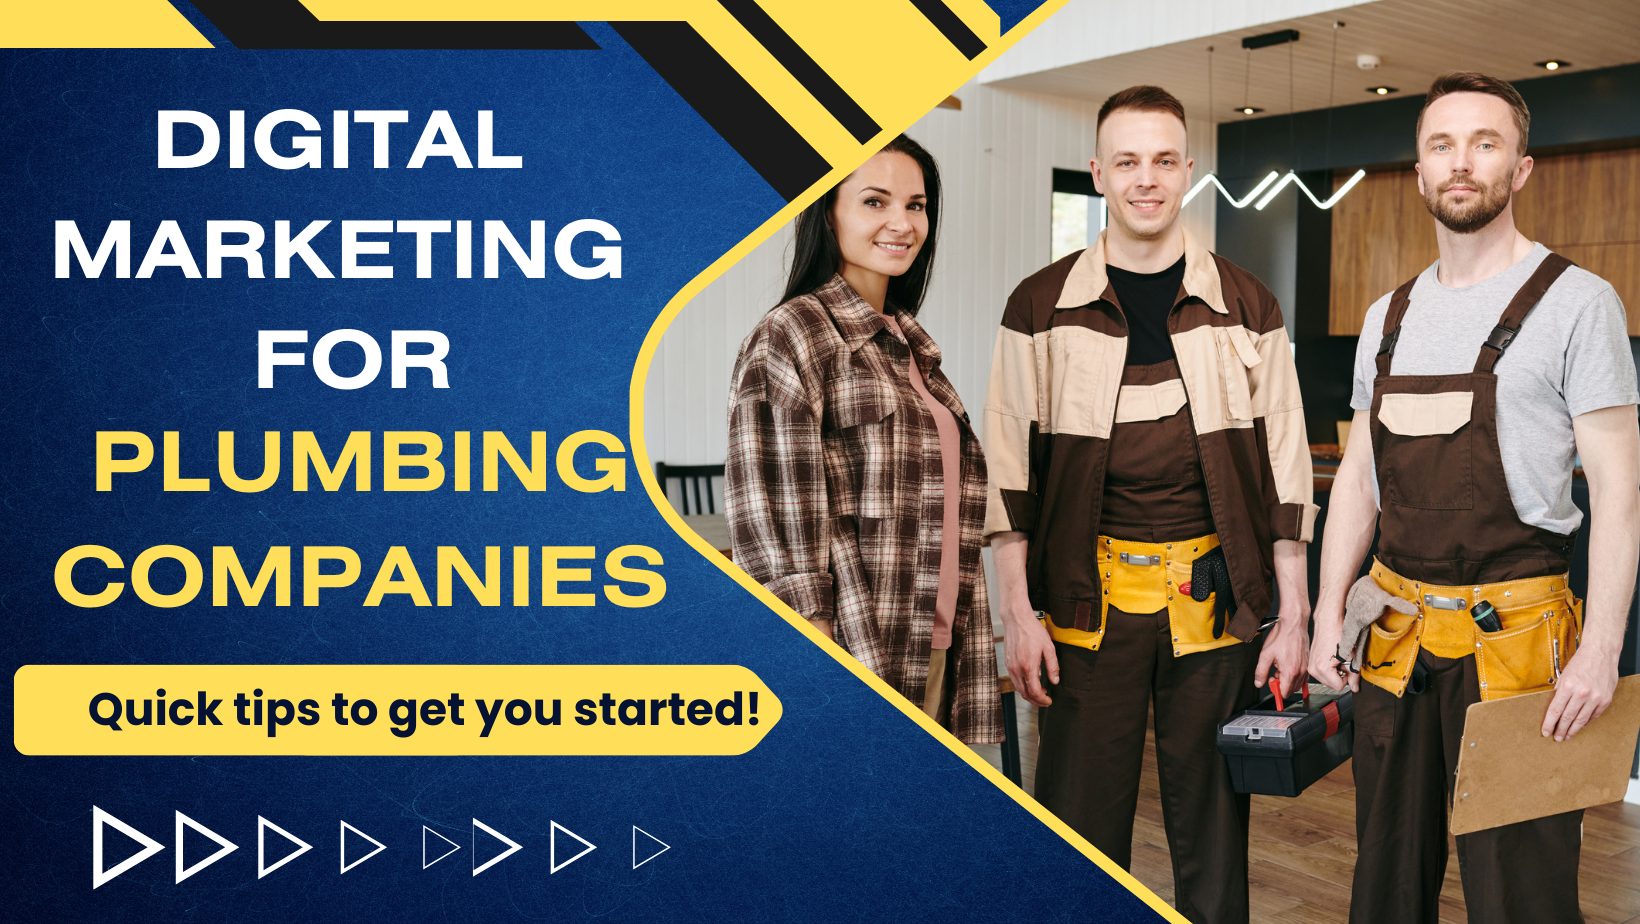 Digital marketing for plumbing companies: quick tips to get you started!